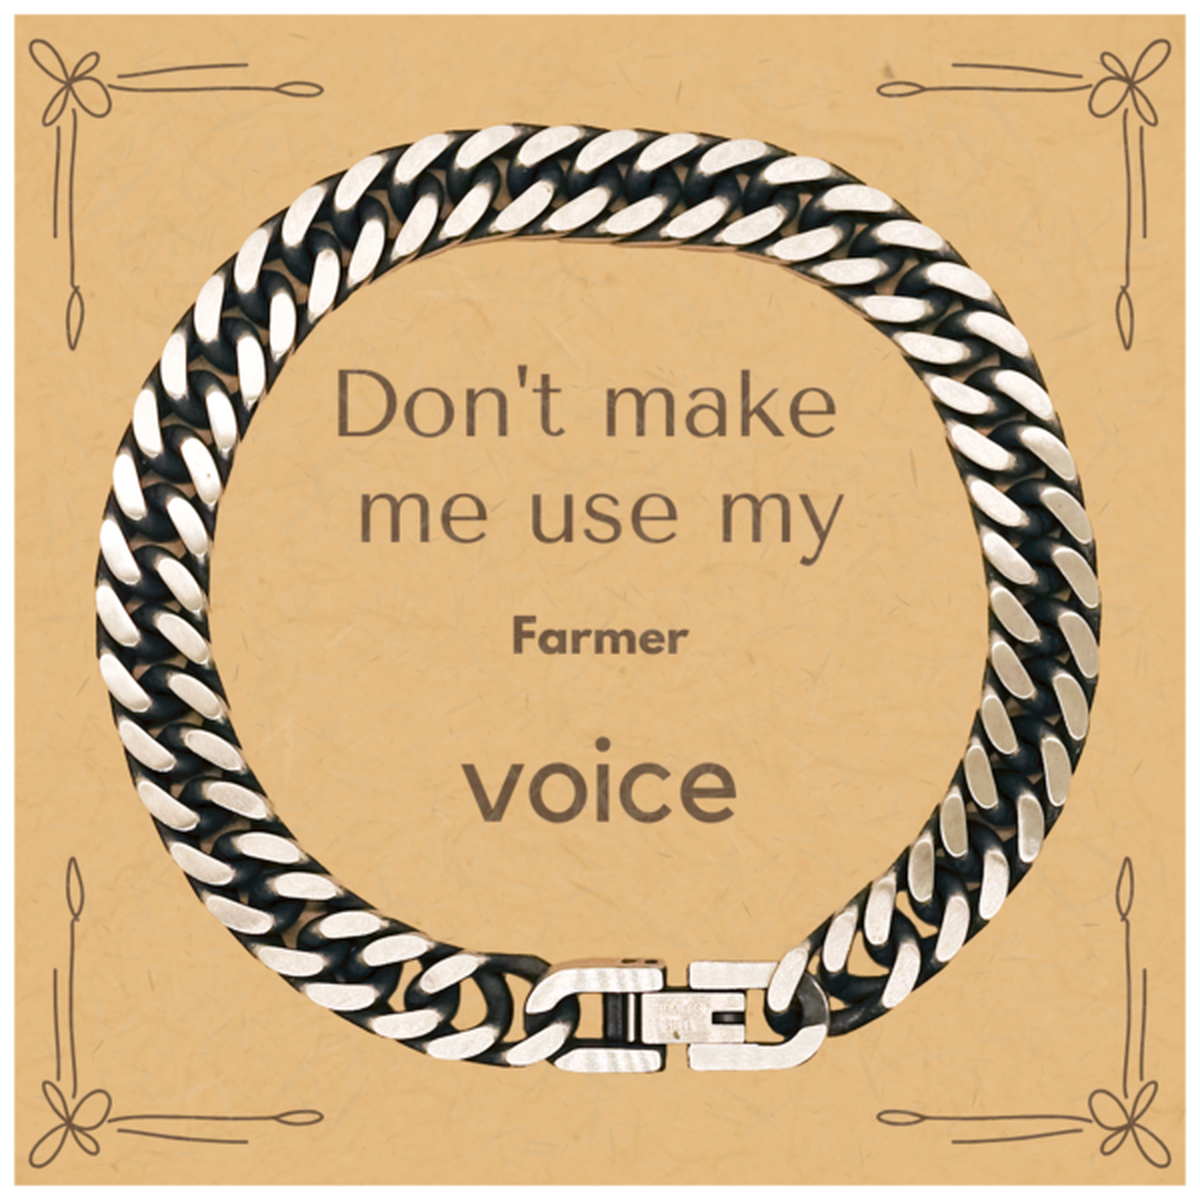 Don't make me use my Farmer voice, Sarcasm Farmer Card Gifts, Christmas Farmer Cuban Link Chain Bracelet Birthday Unique Gifts For Farmer Coworkers, Men, Women, Colleague, Friends